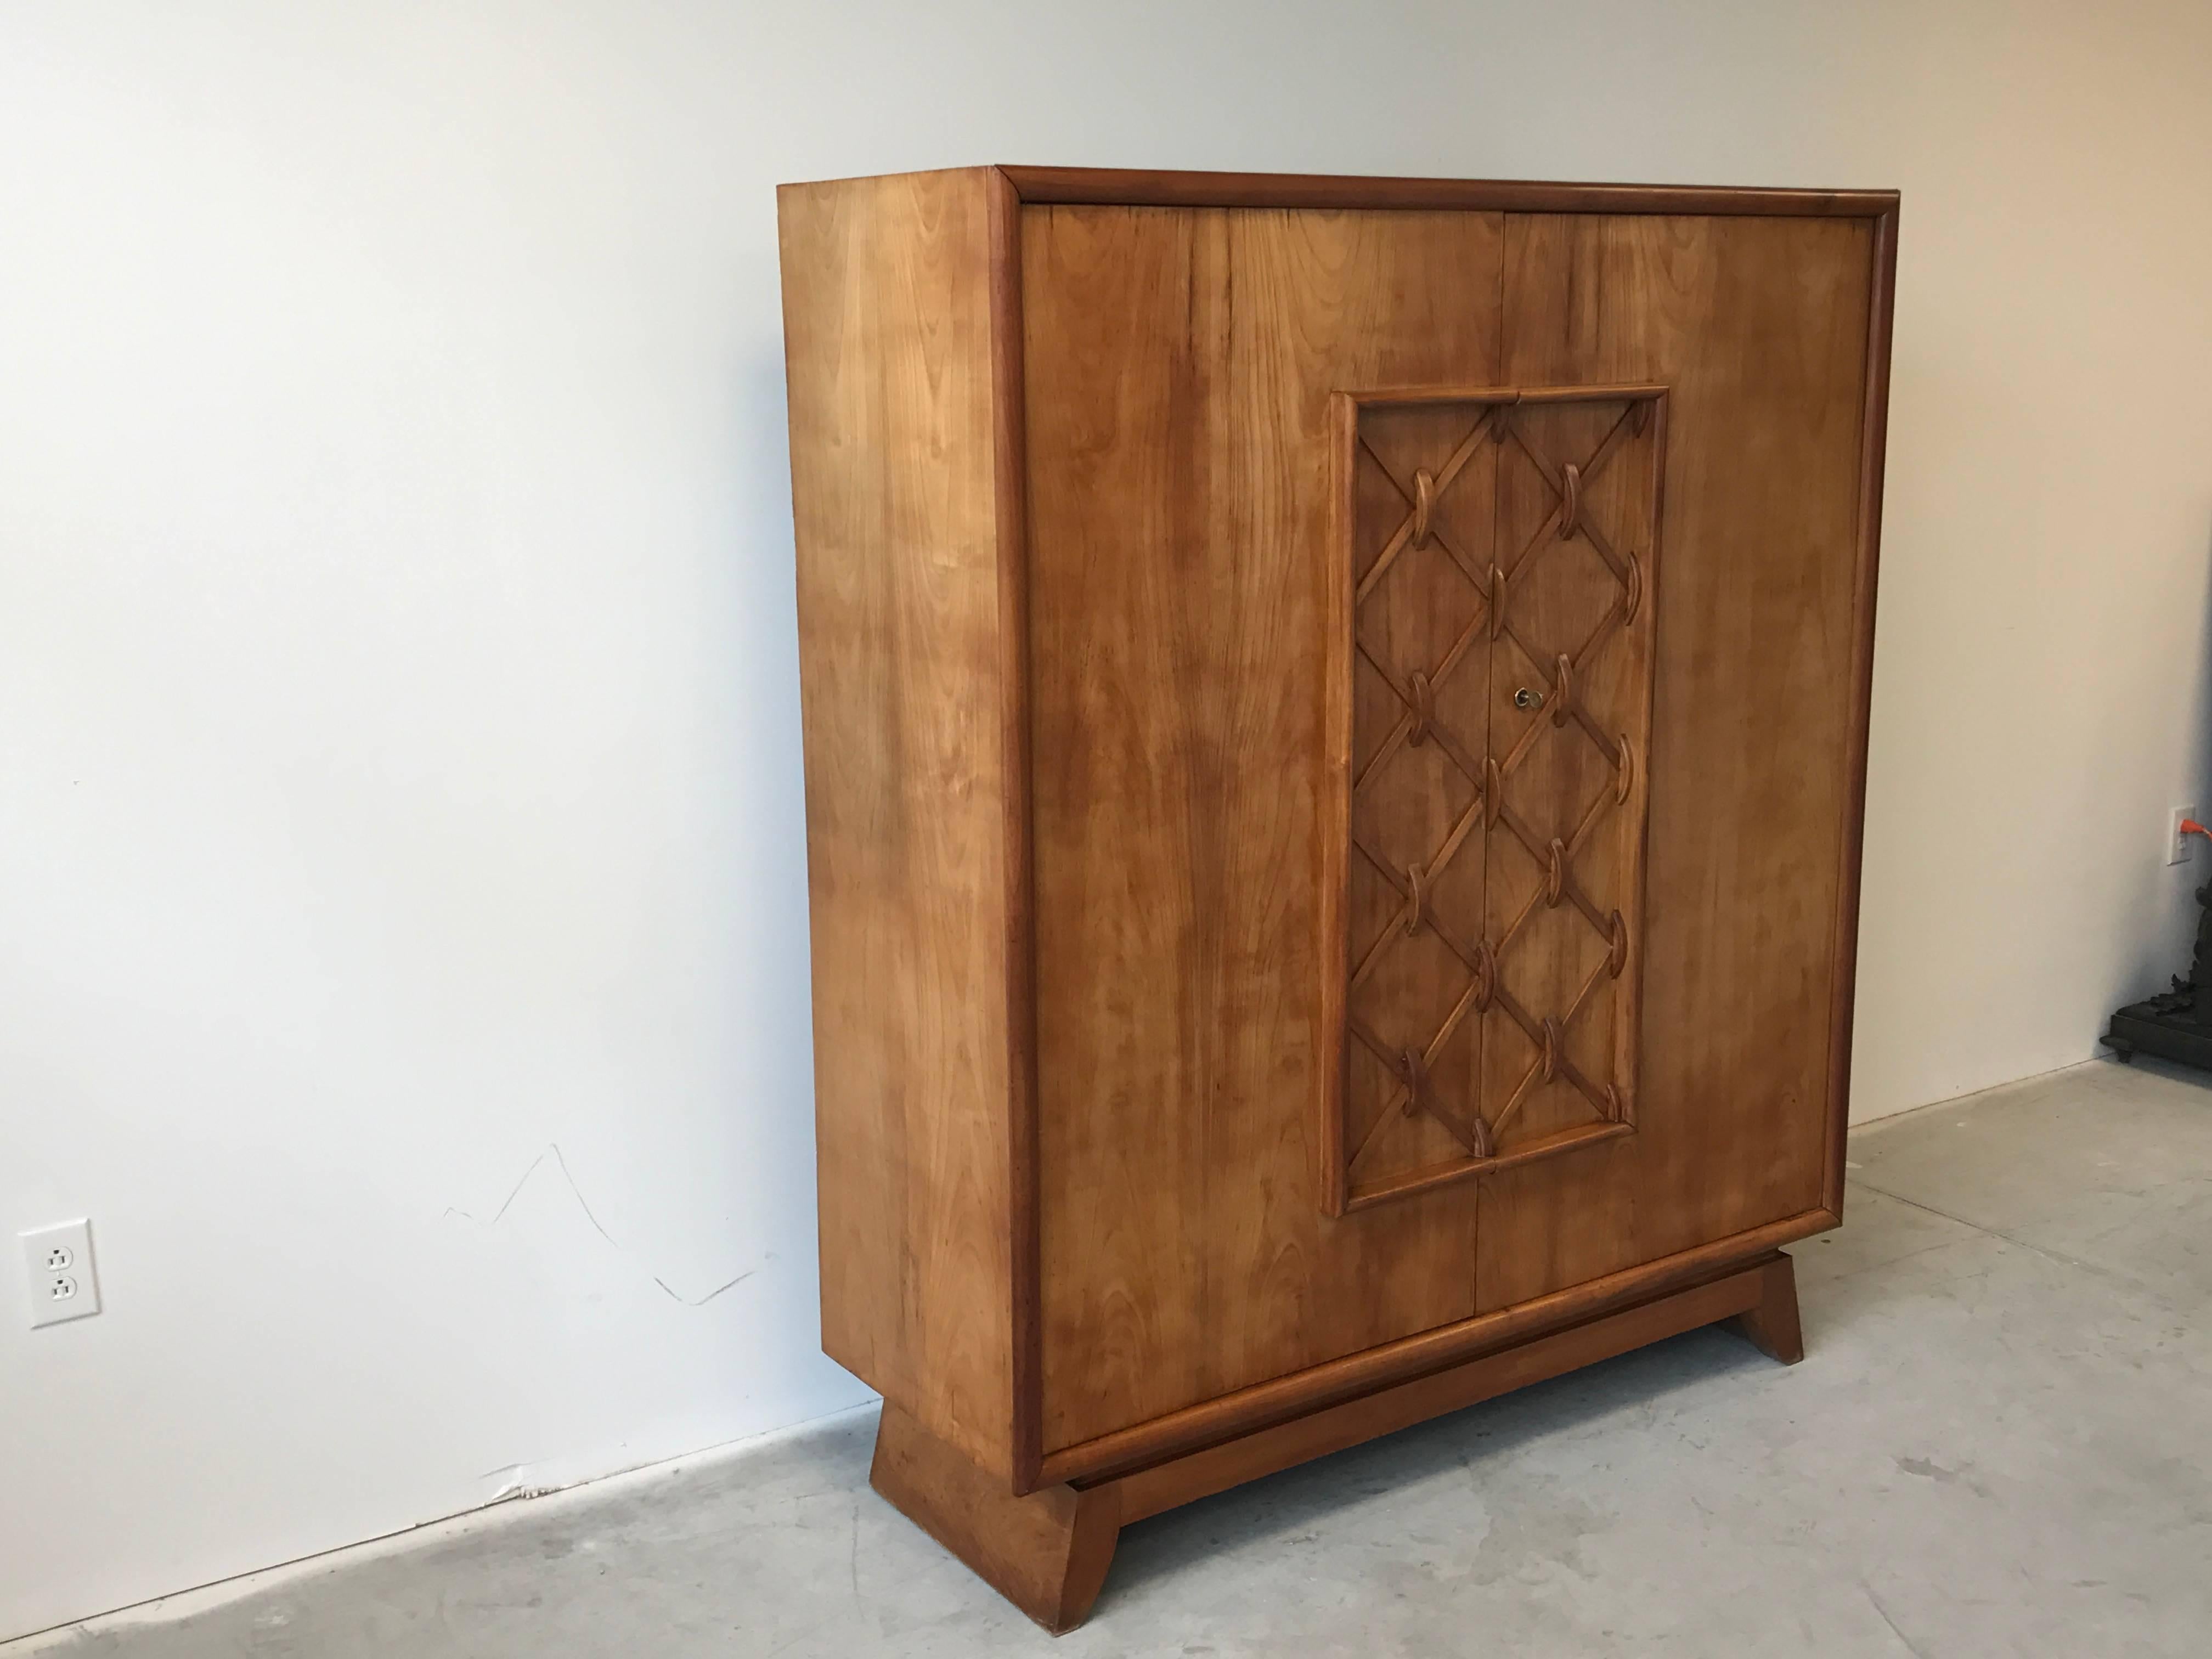 Featured is an exquisite solid maple double door cabinet with six fixed shelves and two pull-out drawers in the manner of French designer Jean Royere, circa 1930s. The chest was likely intended to be used as a gentlemen's sundries cabinet for